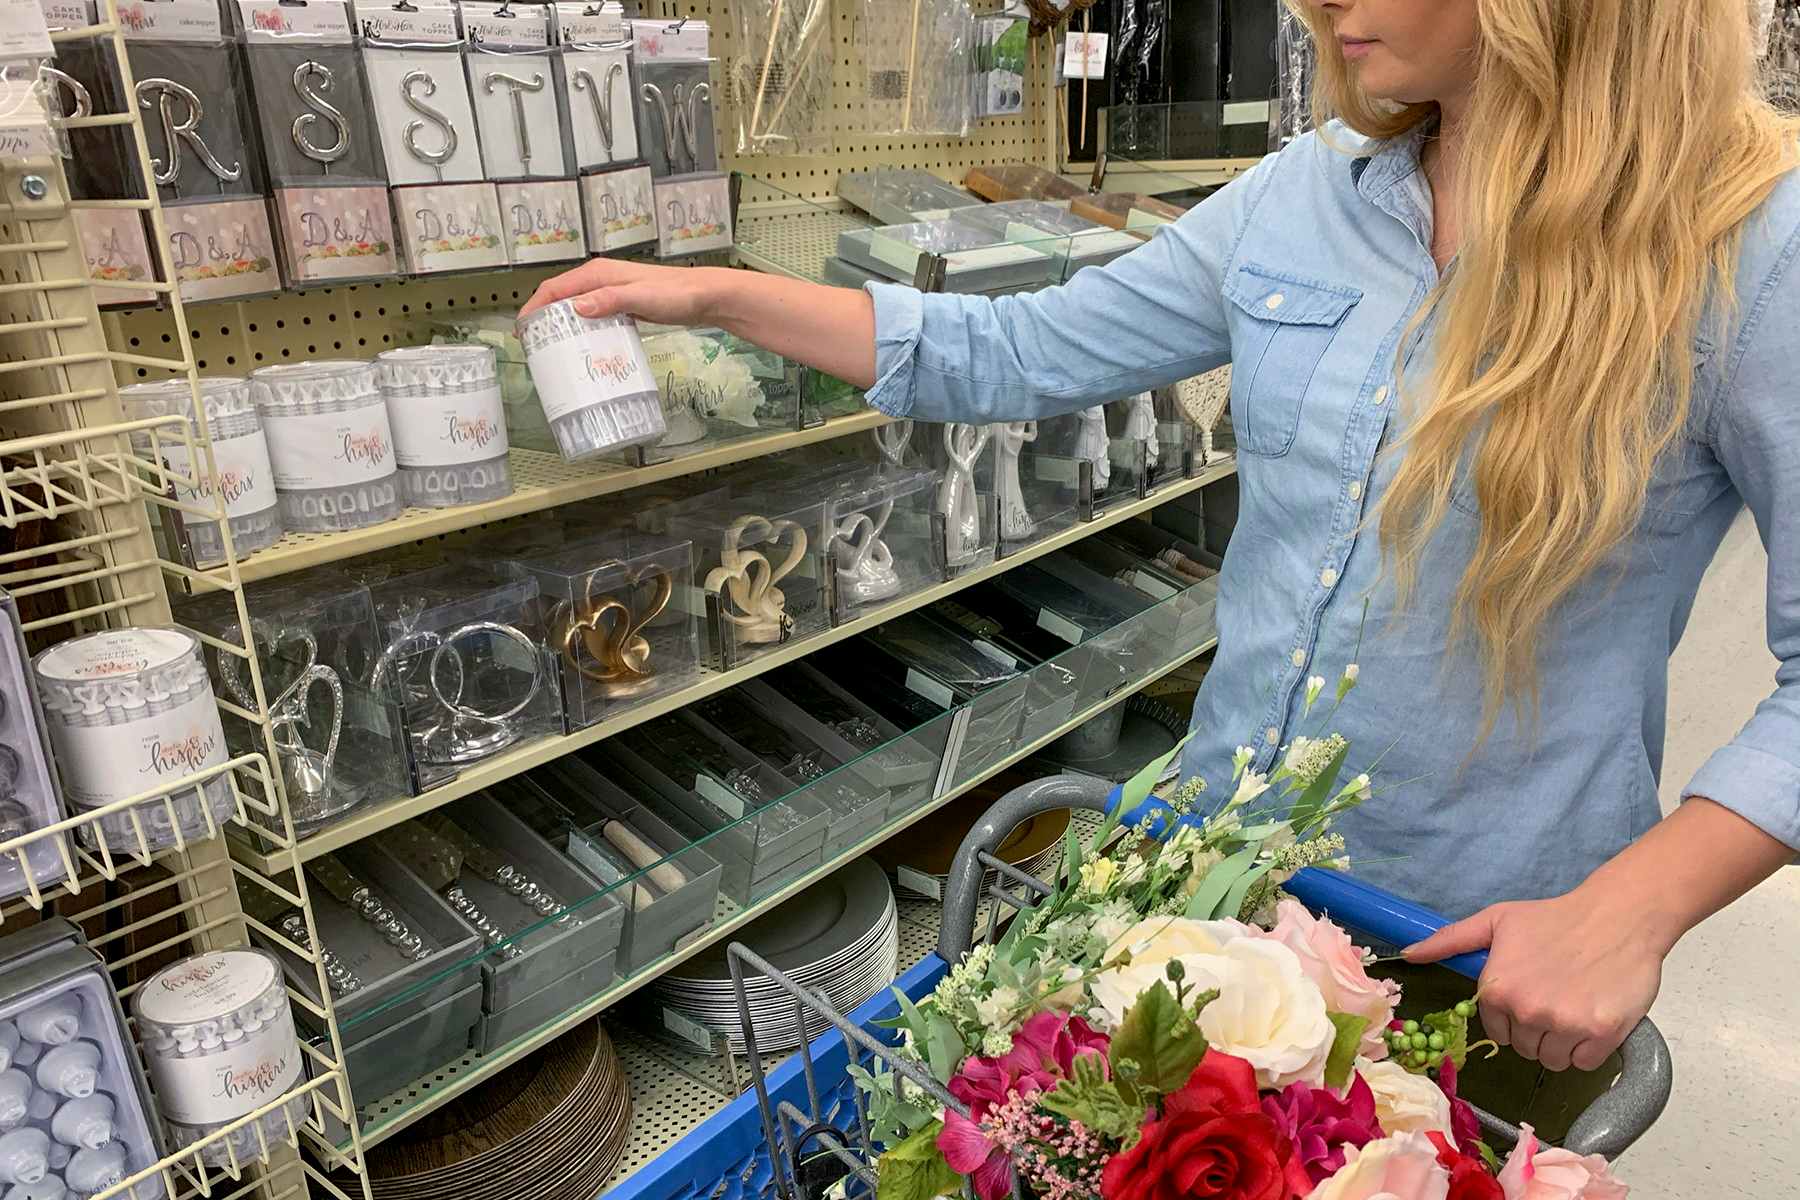 A woman picking up bubbles in the wedding section.